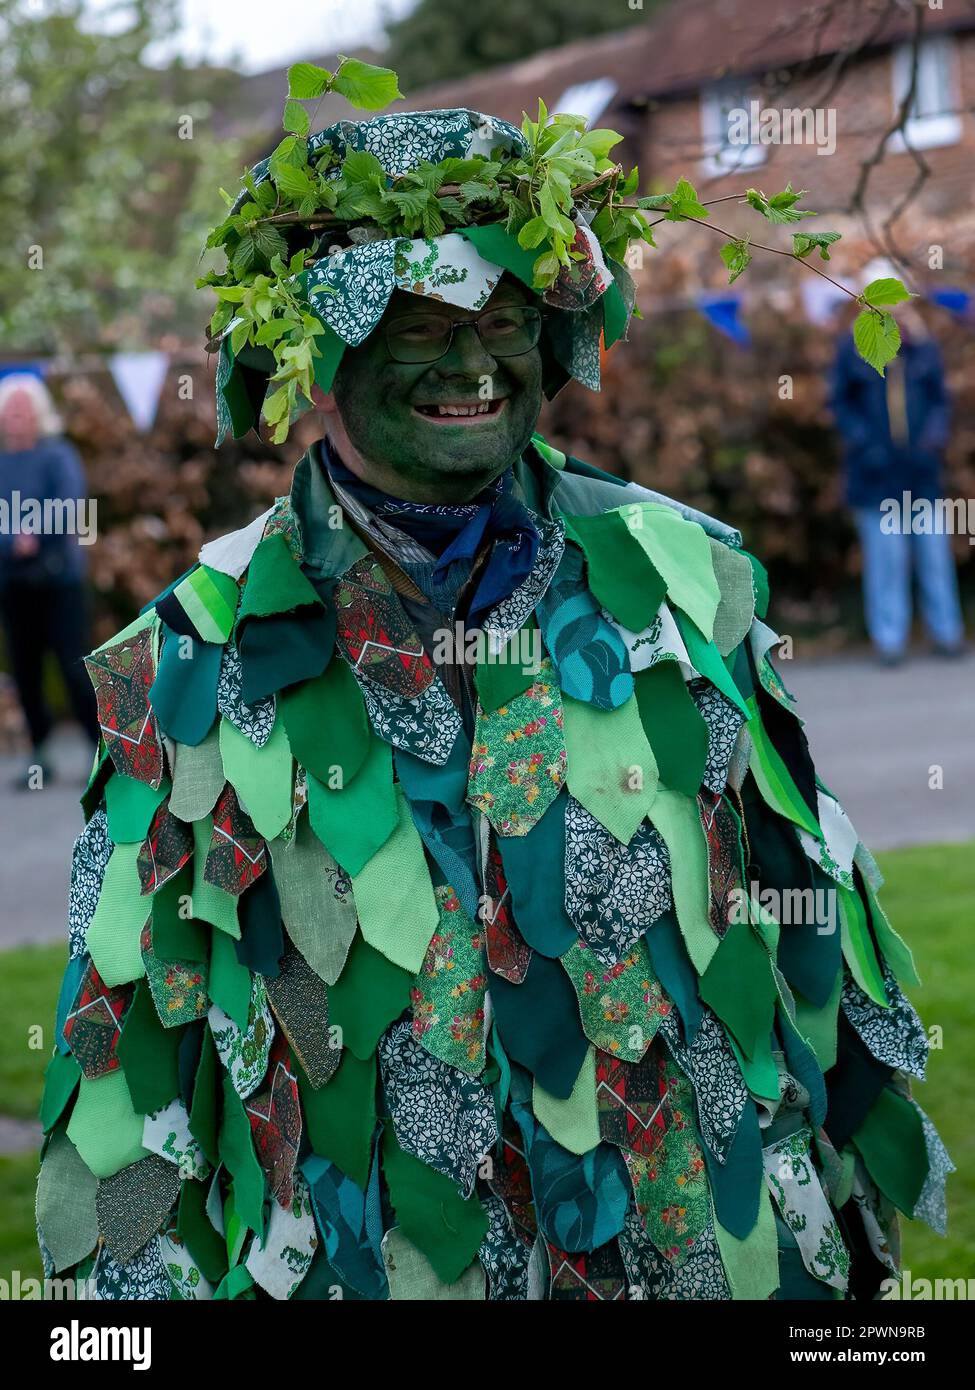 Aldbury village, UK 1st May 2023. The Green man,a traditional figure in Morris Dancing.Have you ever been to a pub called The Green Man? This is a Green Man, the Green Man dates back to medieval times and  was 'the central figure in the May Day celebrations throughout Northern and Central Europe'. As the Green Man is also portrayed with acorns and hawthorn leaves he was considered a symbol of fertility & rebirth, representing the cycle of new growth that occurs every Spring. Sue Thatcher/Alamy Live News Stock Photo